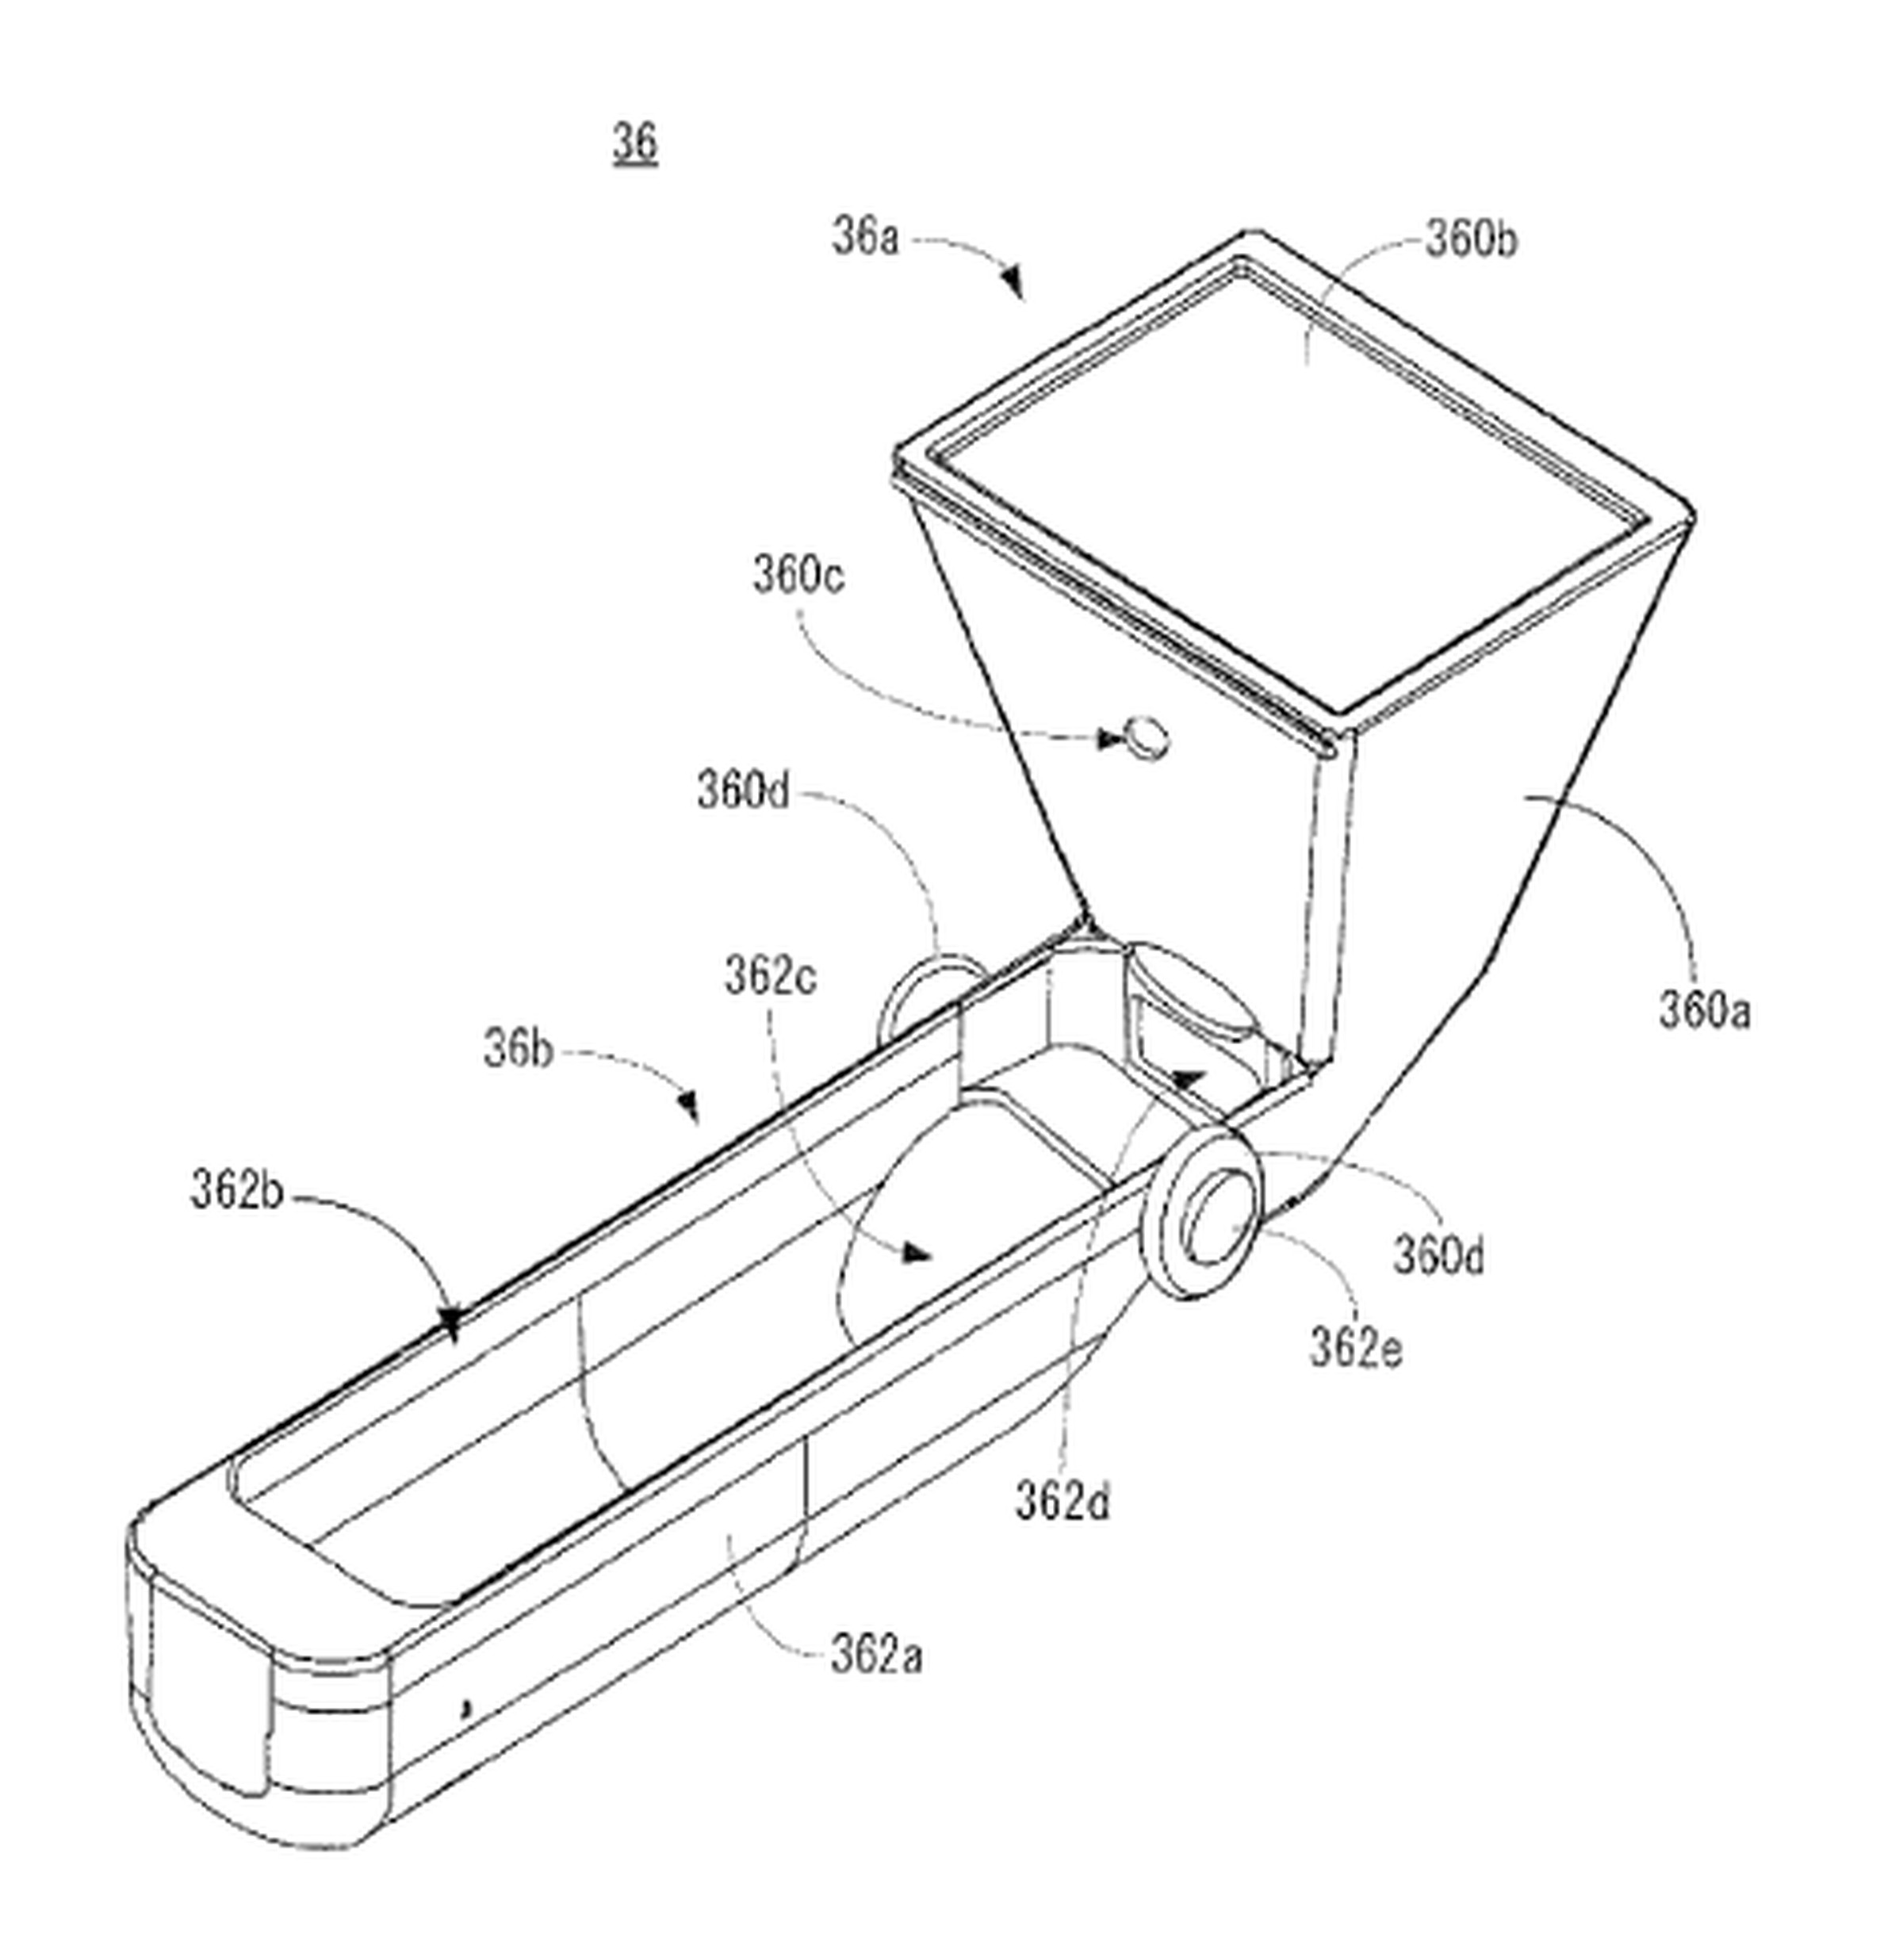 Wii Remote touch panel accessory patent diagrams